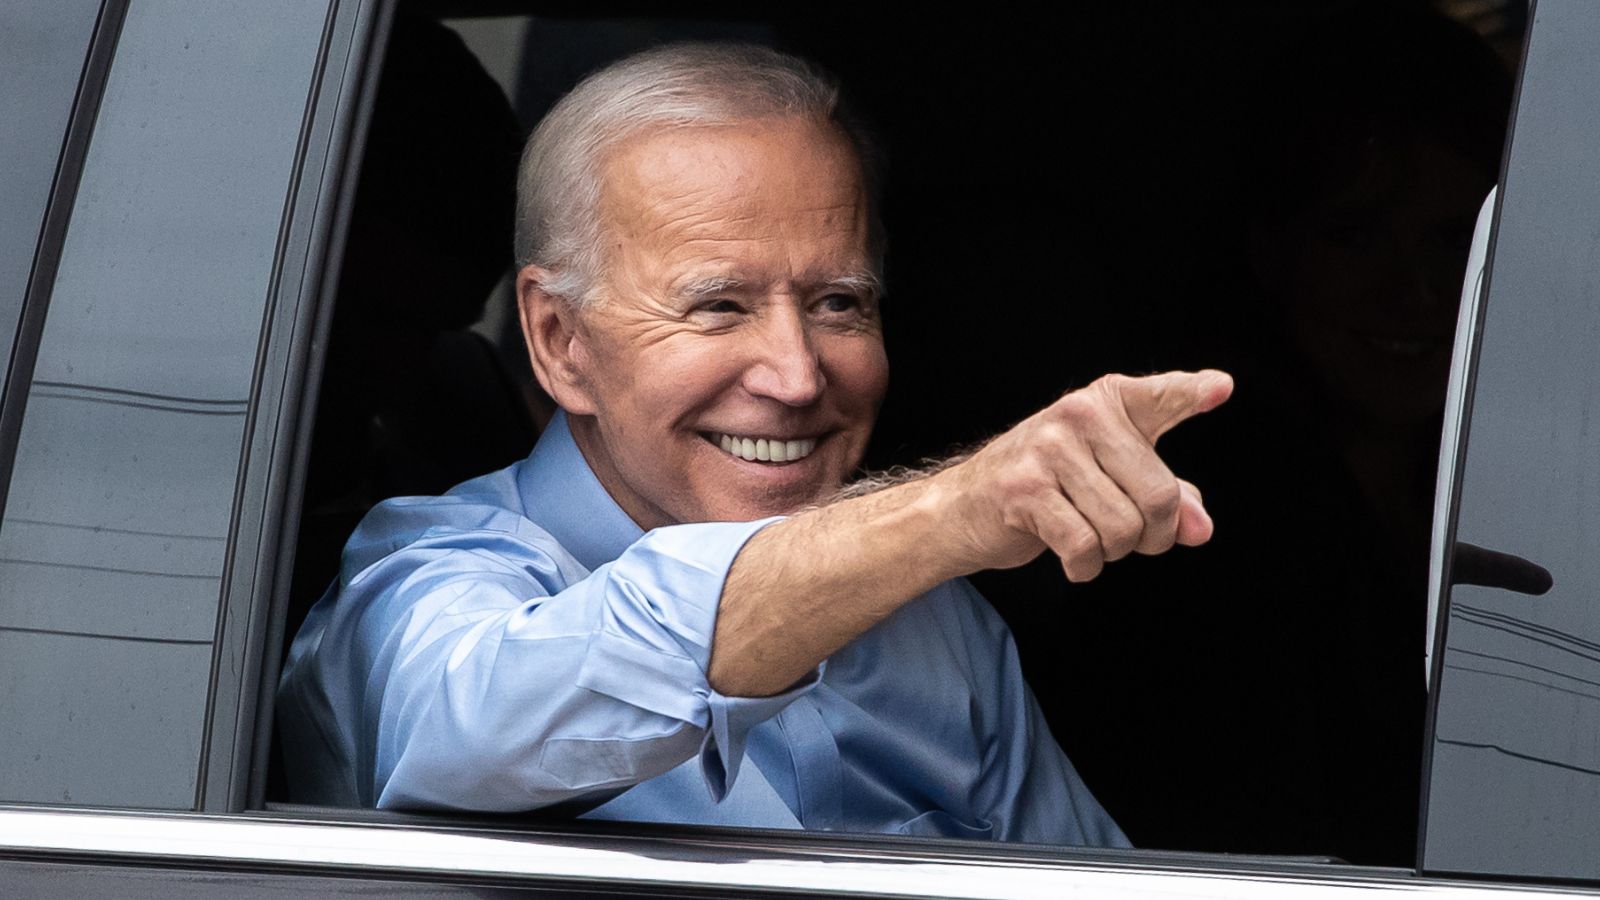 “We Will Not Survive This” – House Divided and Nation at Stake Over Biden’s Potential Impeachment